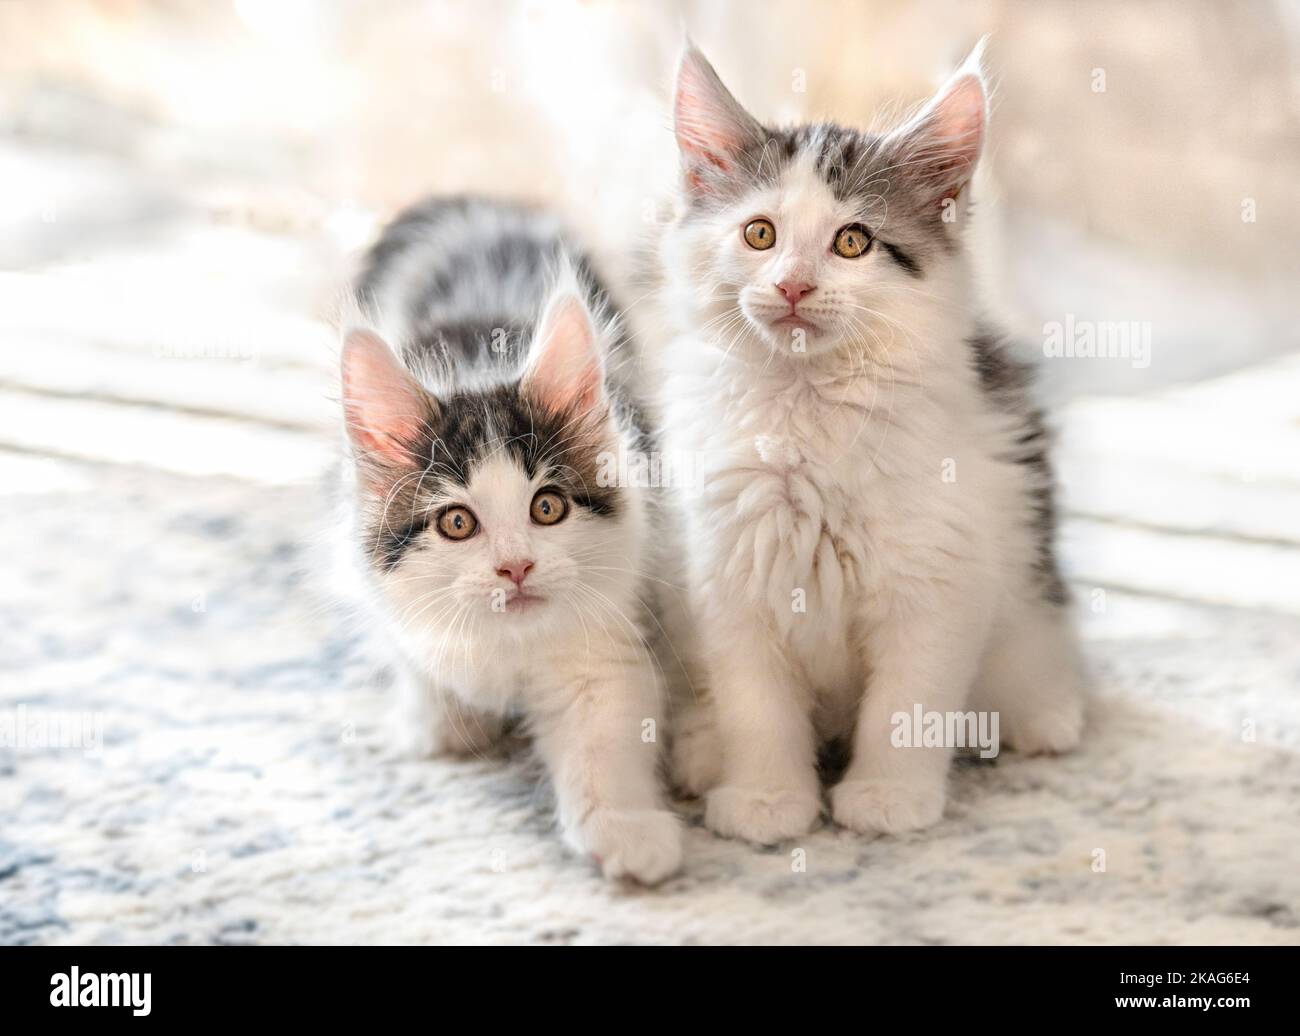 Pair of  curious, alert 9 week old, Maine Coon Cat kittens playing on carpet Stock Photo